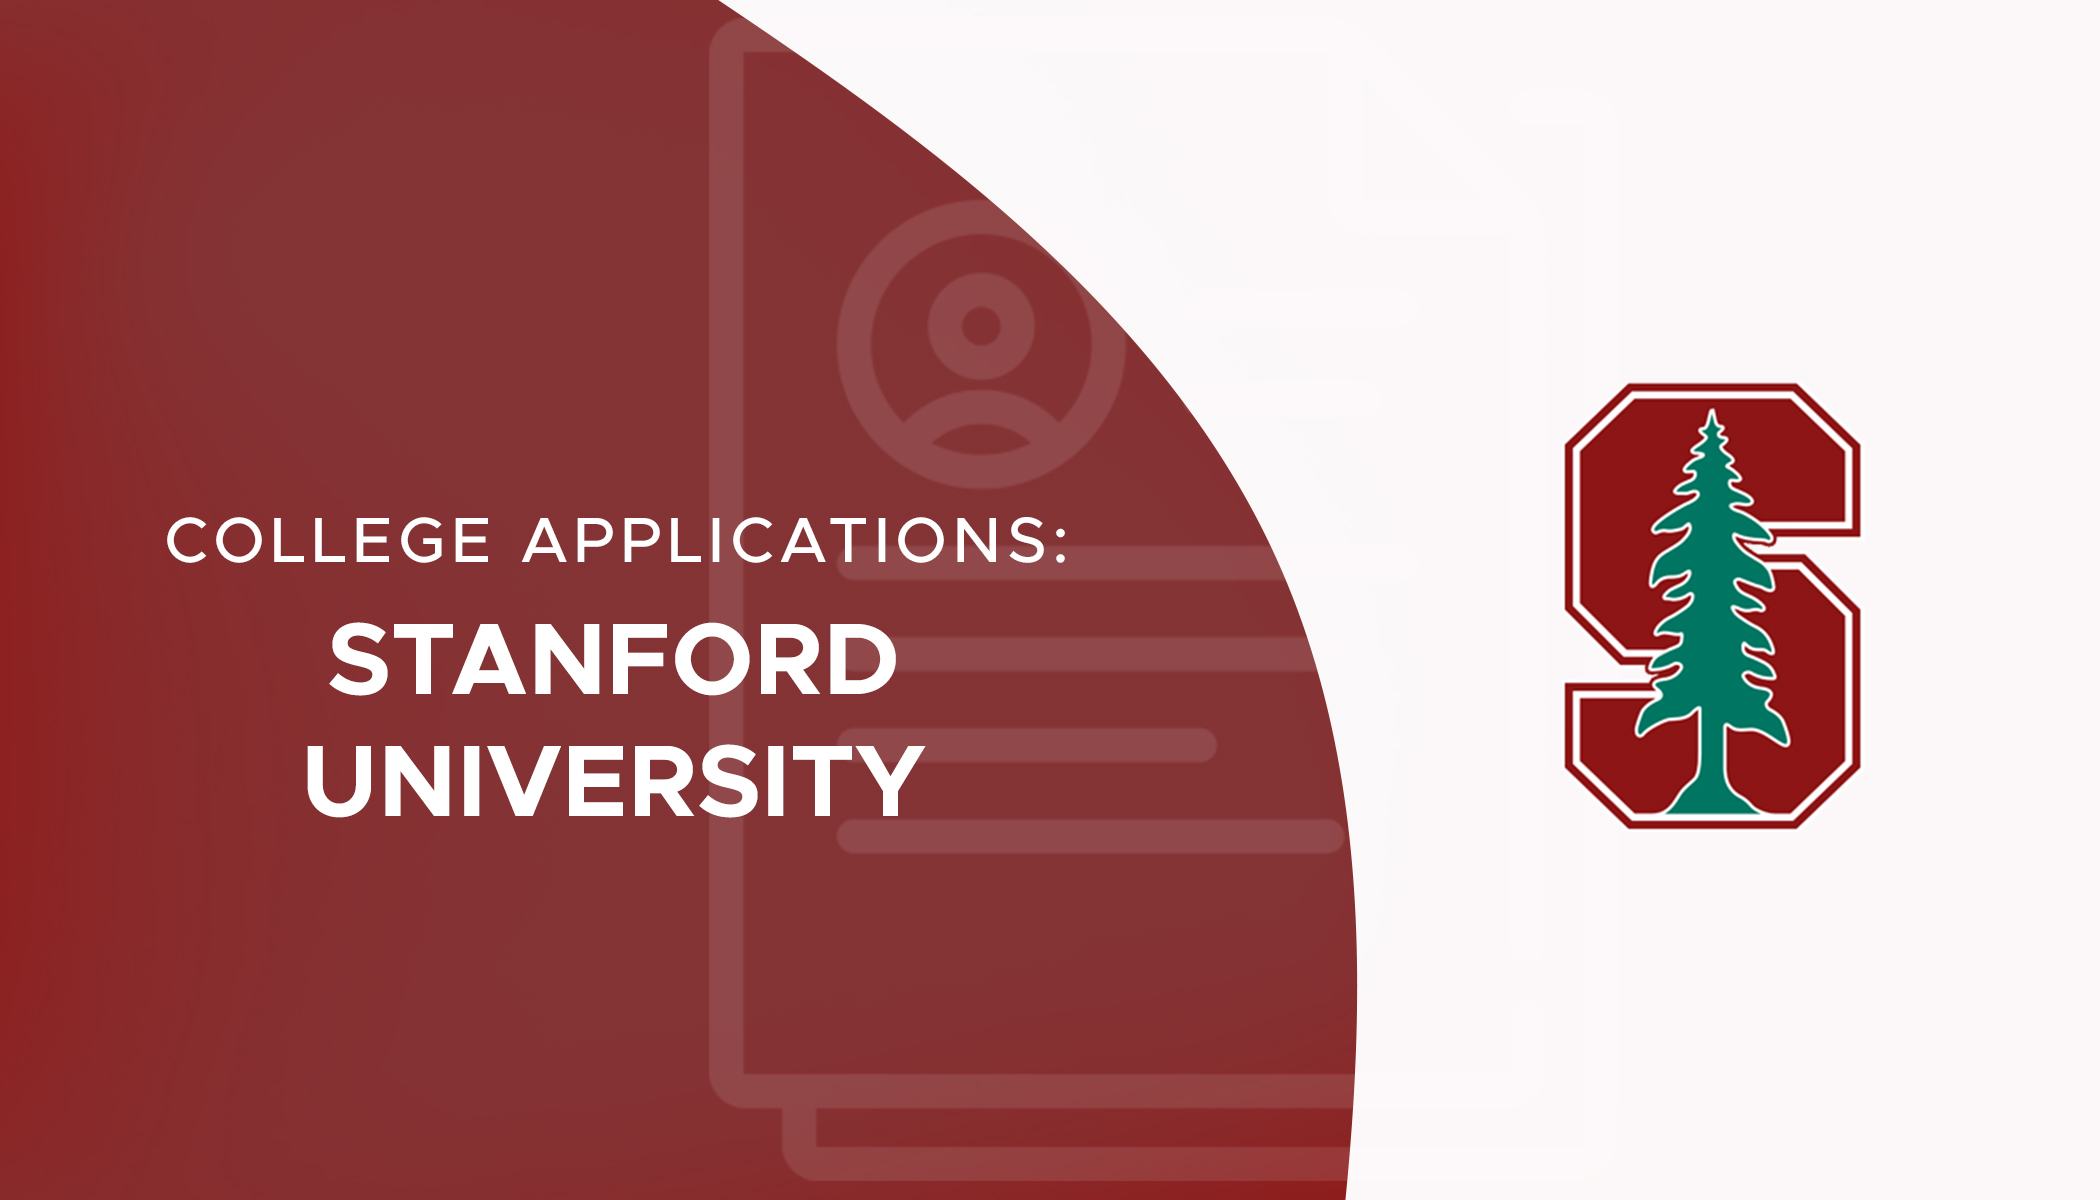 stanford application essay requirements